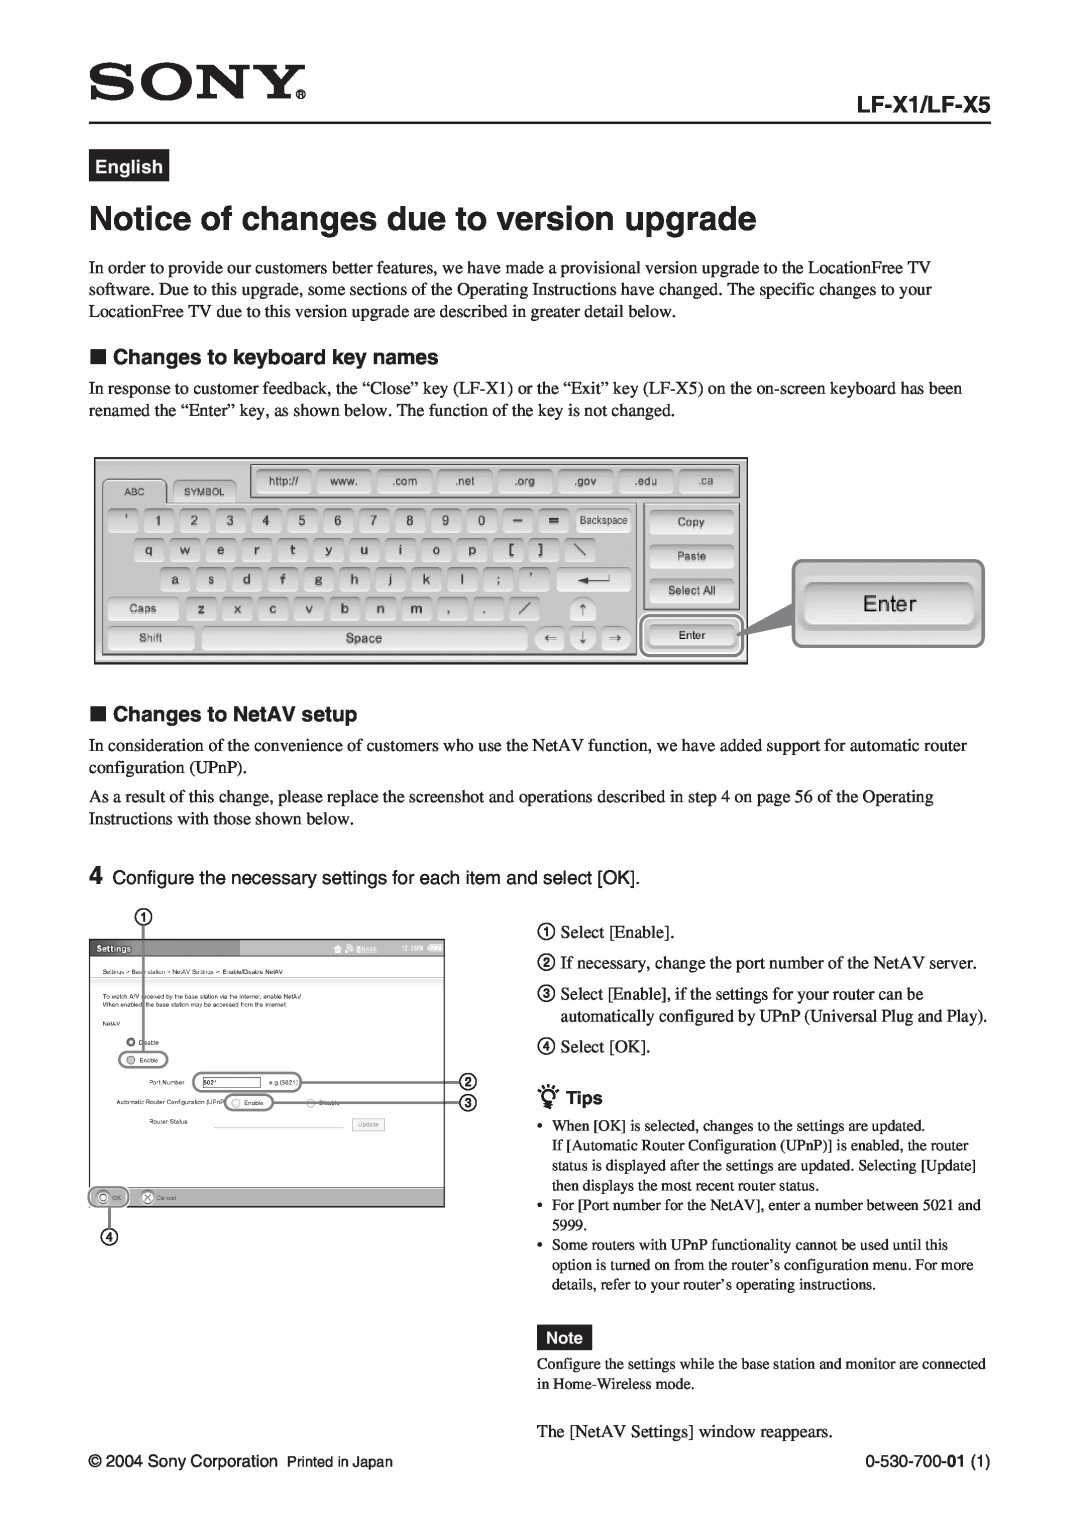 Sony LF-X5, 185 manual Notice of changes due to version upgrade, x Changes to keyboard key names, x Changes to NetAV setup 